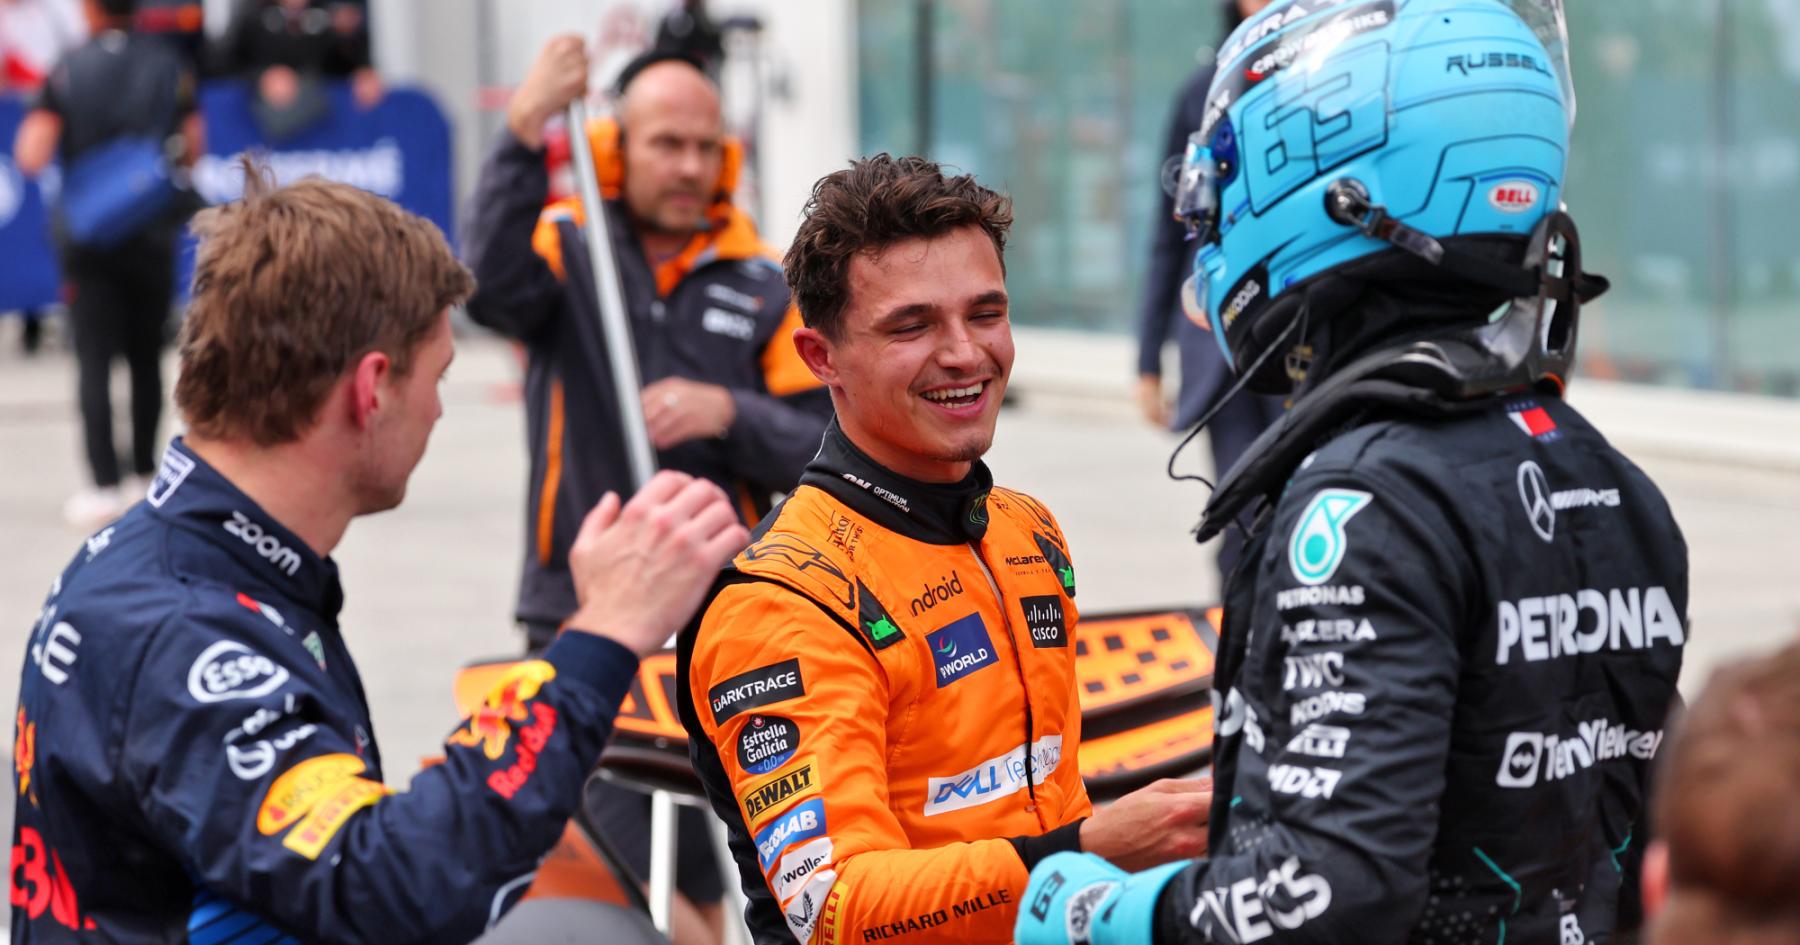 Revving Up the Rivalry: Norris Challenges Verstappen With New Touch of Competition